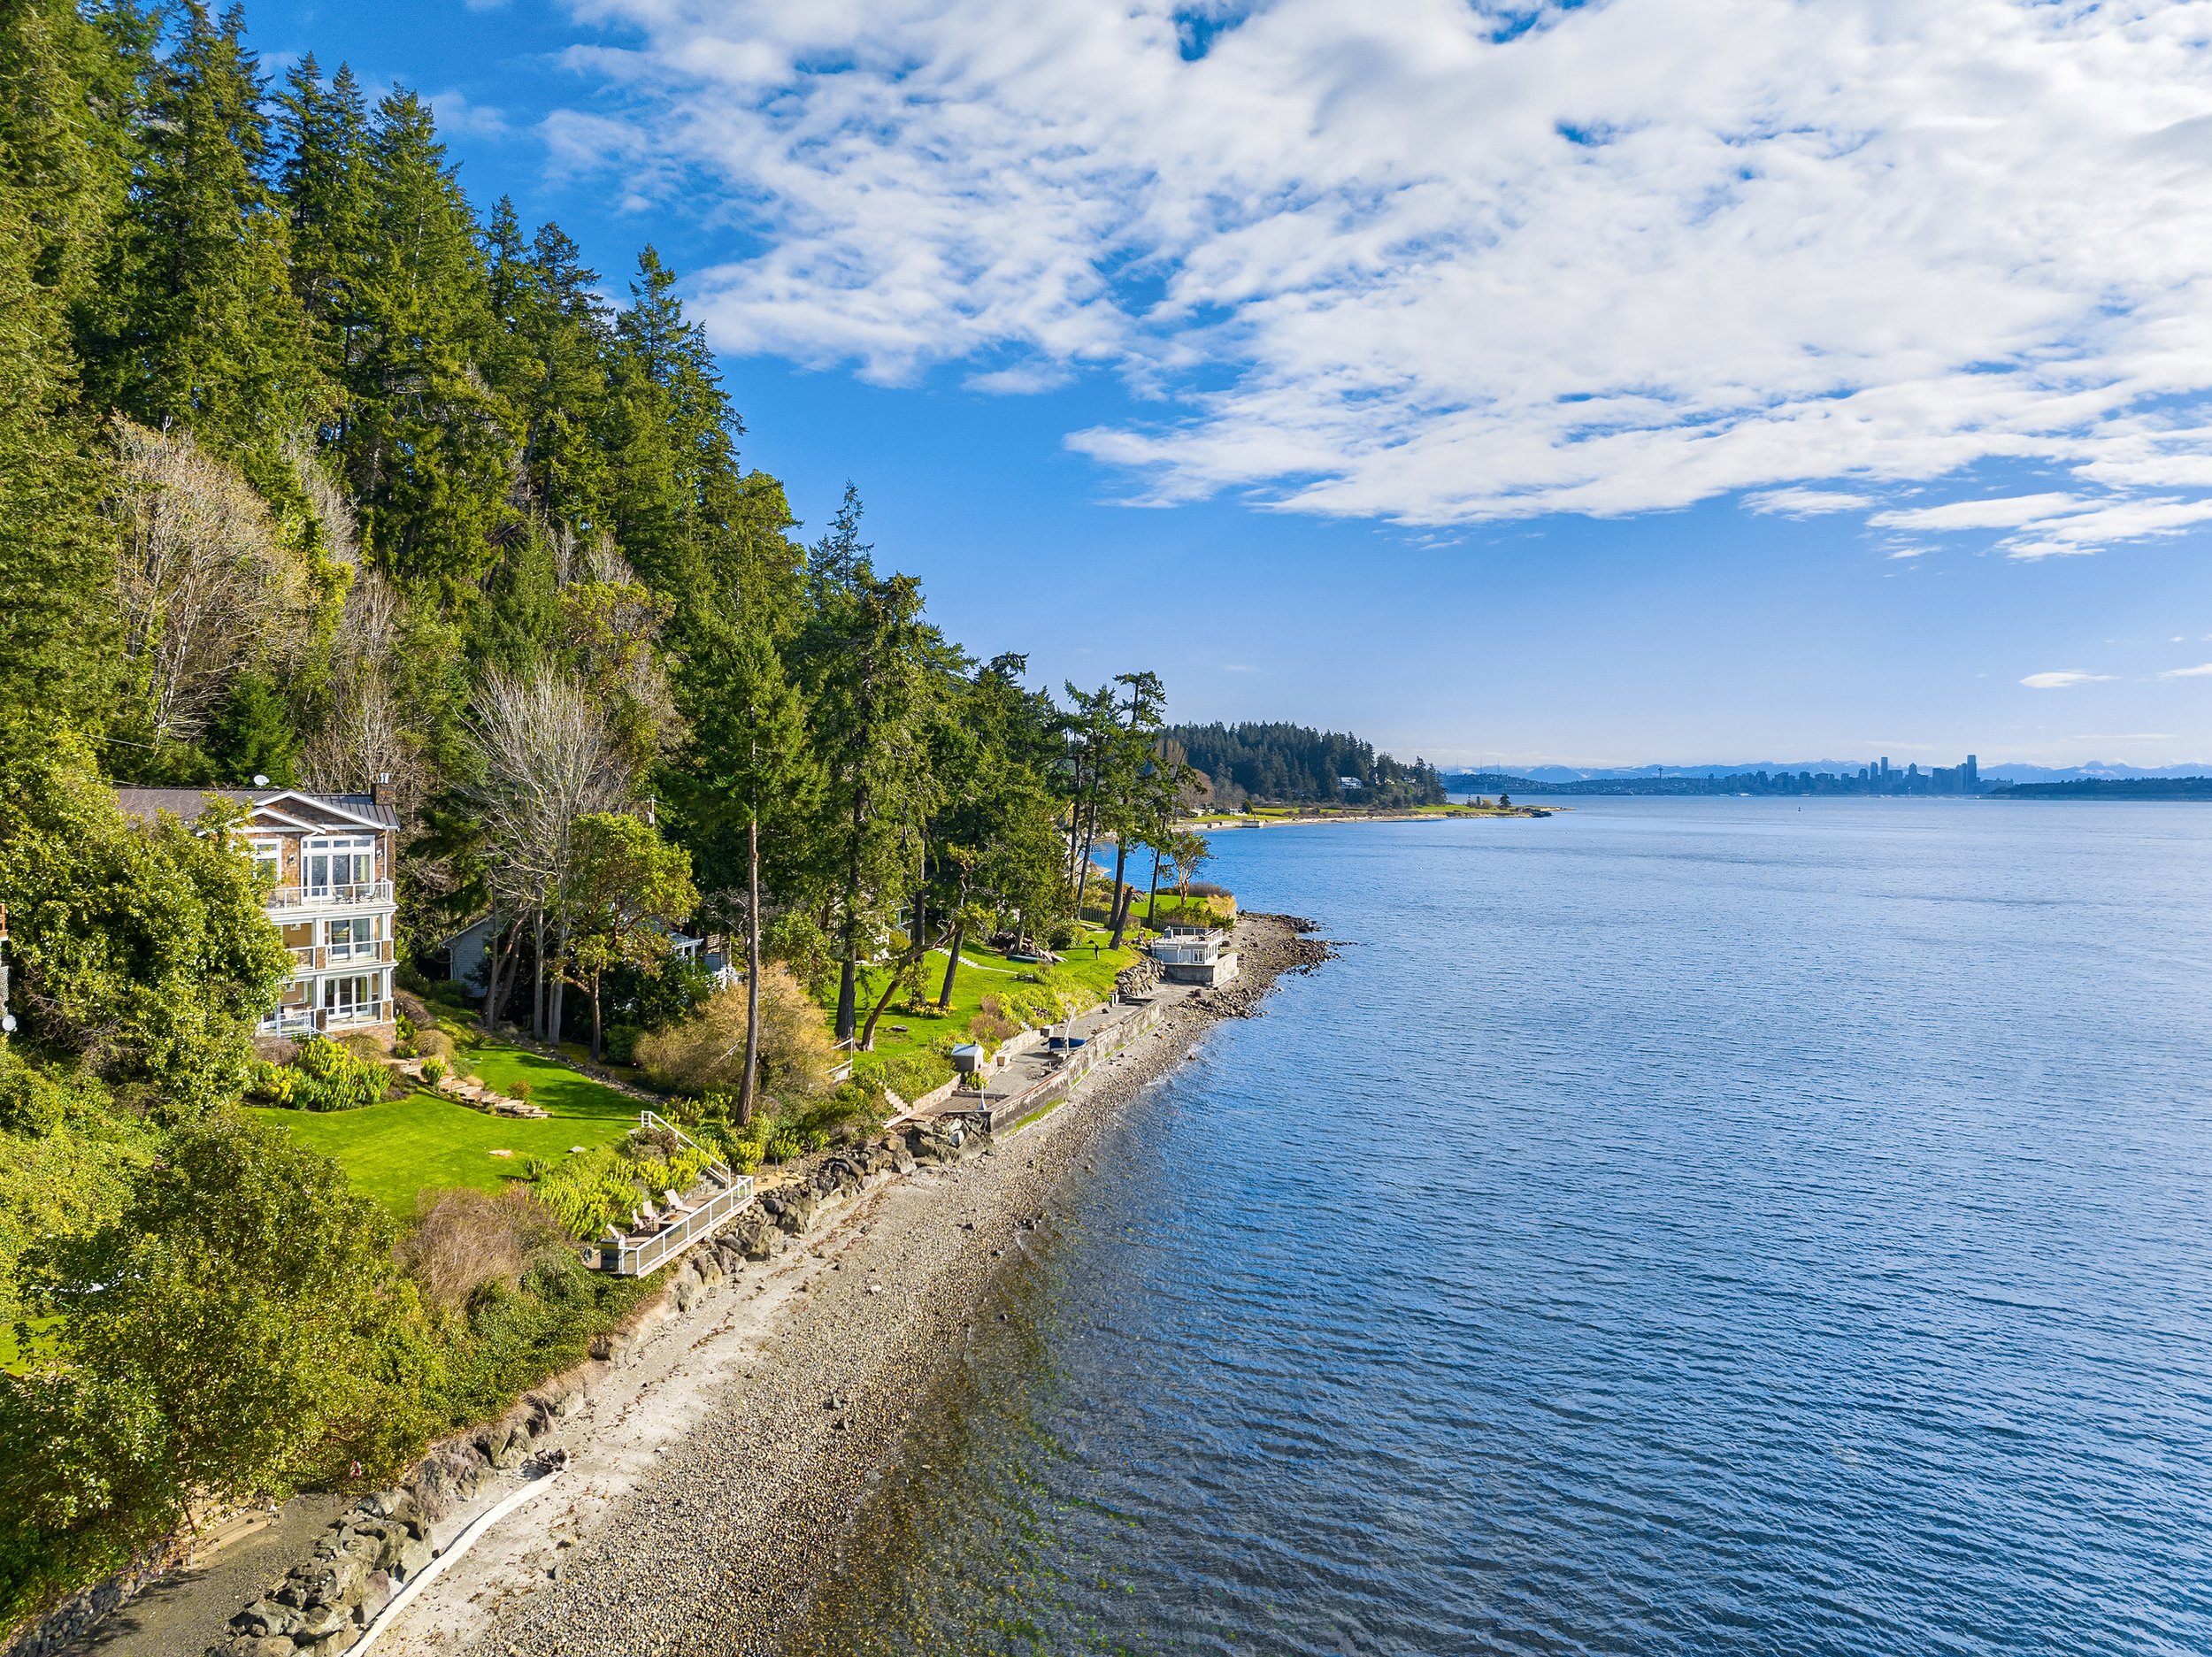  This waterfront home on Bainbridge Island listed for sale by Danny Varona, of Realogics Sotheby’s International Realty has a view of Mt Rainier and the Seattle skyline. 